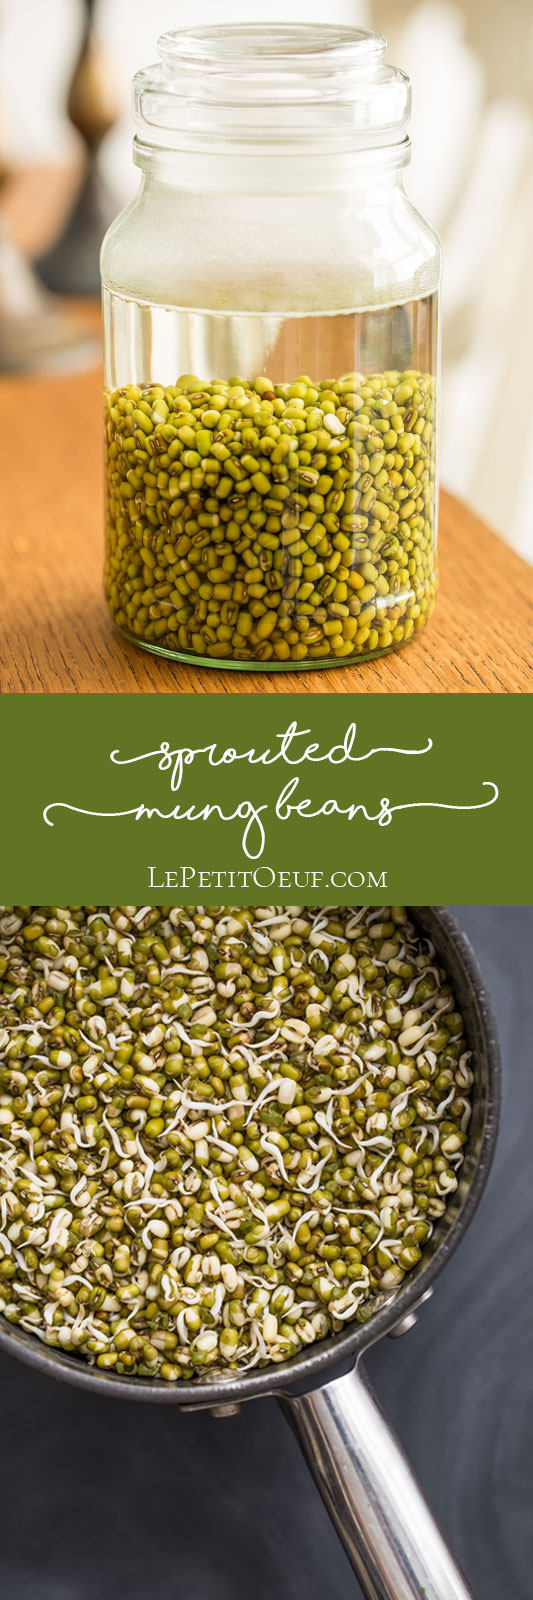 Once you've learned how to sprout mung beans you'll be converted to these incredibly nutritious legumes, being crammed with protein, carbohydrate, low fat and high in nutrients, vitamins and minerals. They're fantastic to have in salads and there's a lovely pleasure in seeing them grow as you sprout them over a few days!